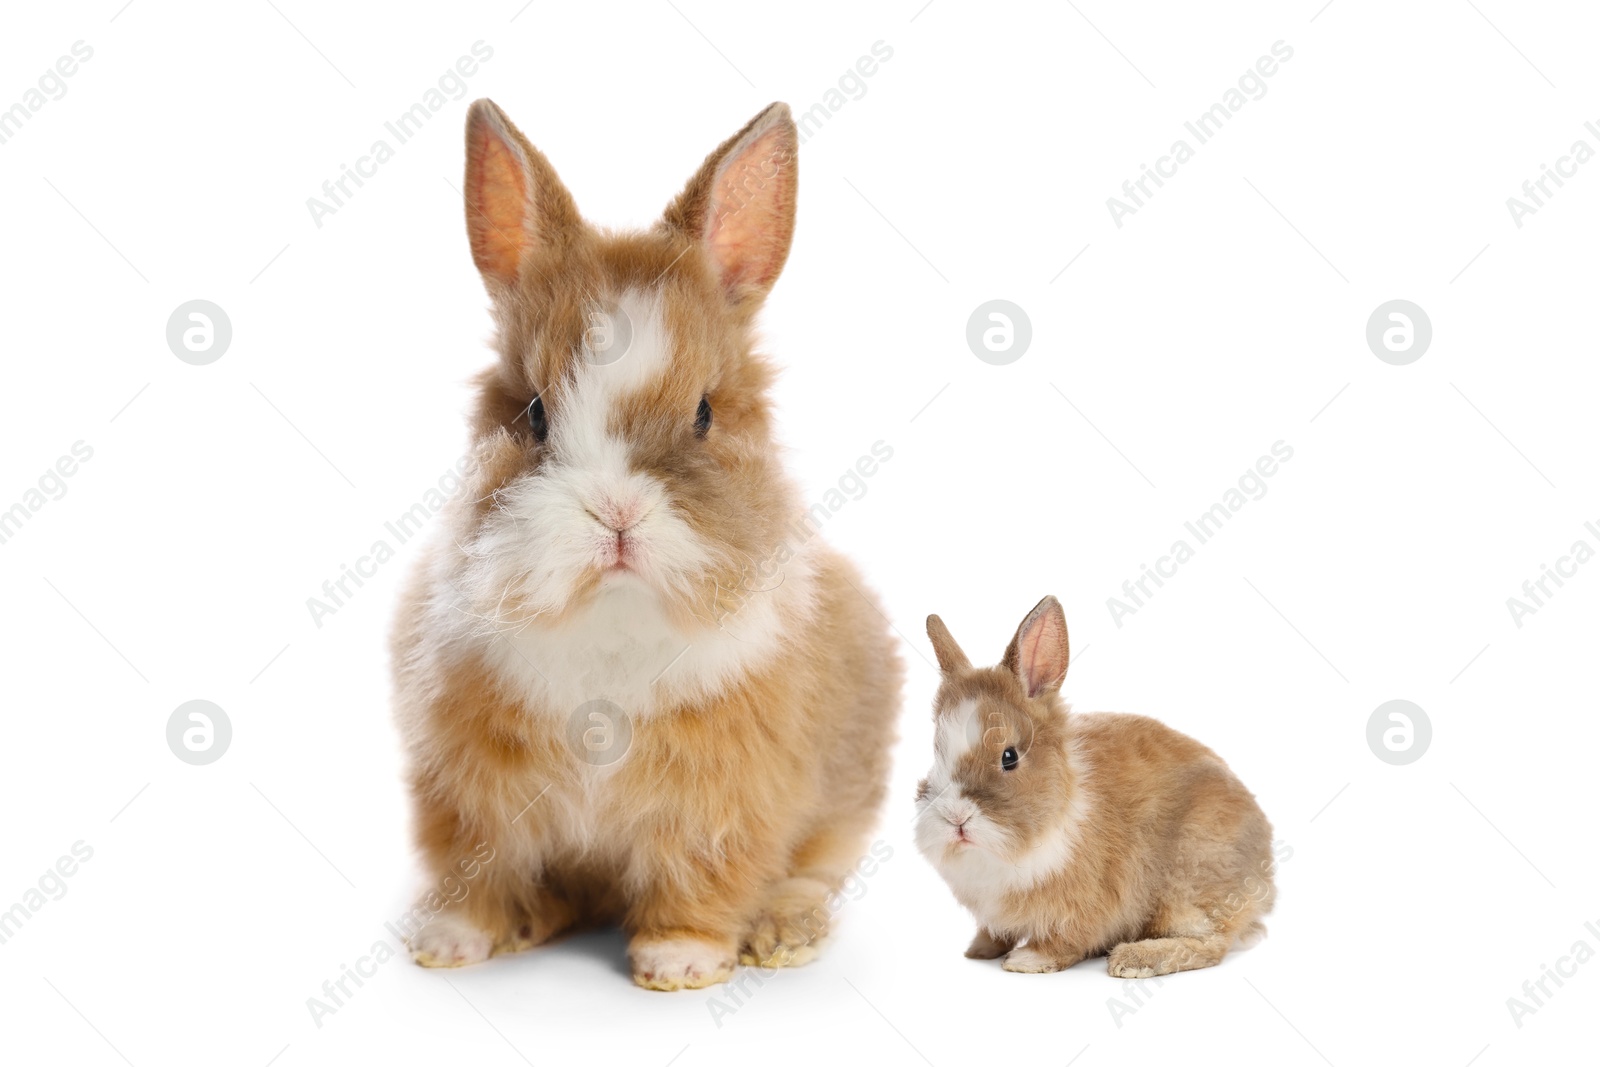 Image of Mother rabbit and baby bunny isolated on white